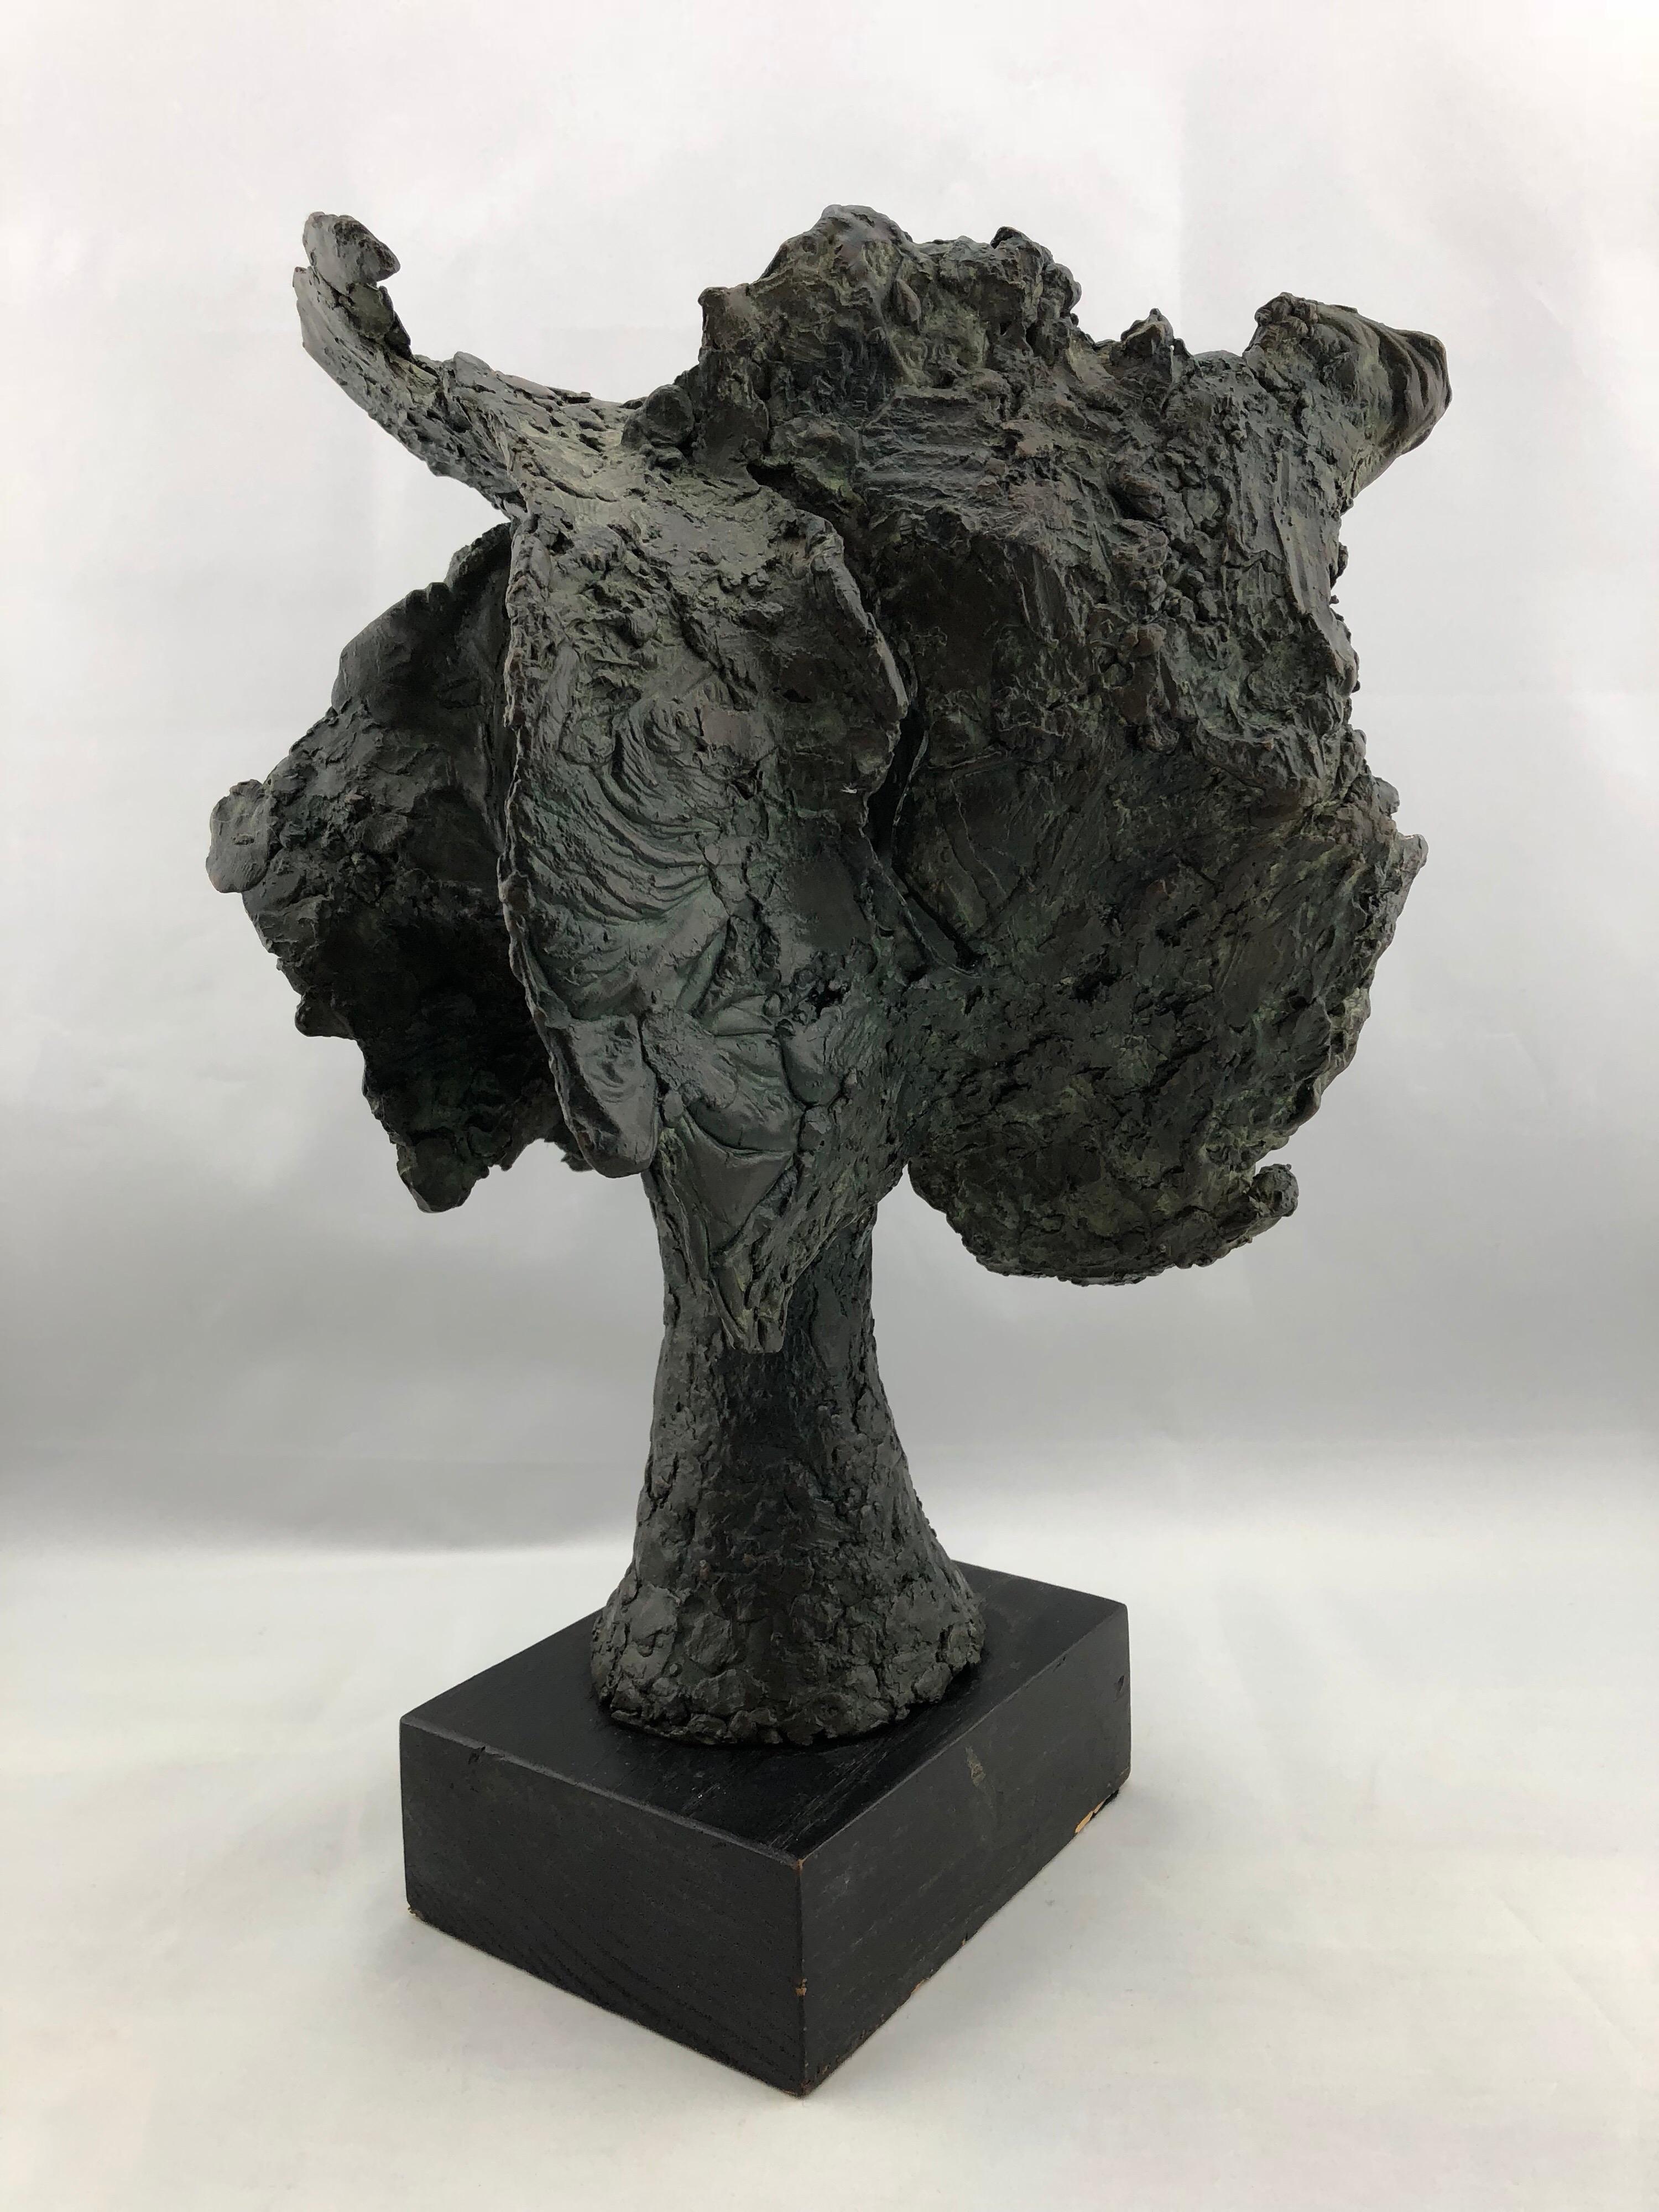 Rare Vintage Bronze Sculpture by Artist John Begg, Signed and Numbered 1 of 1 1